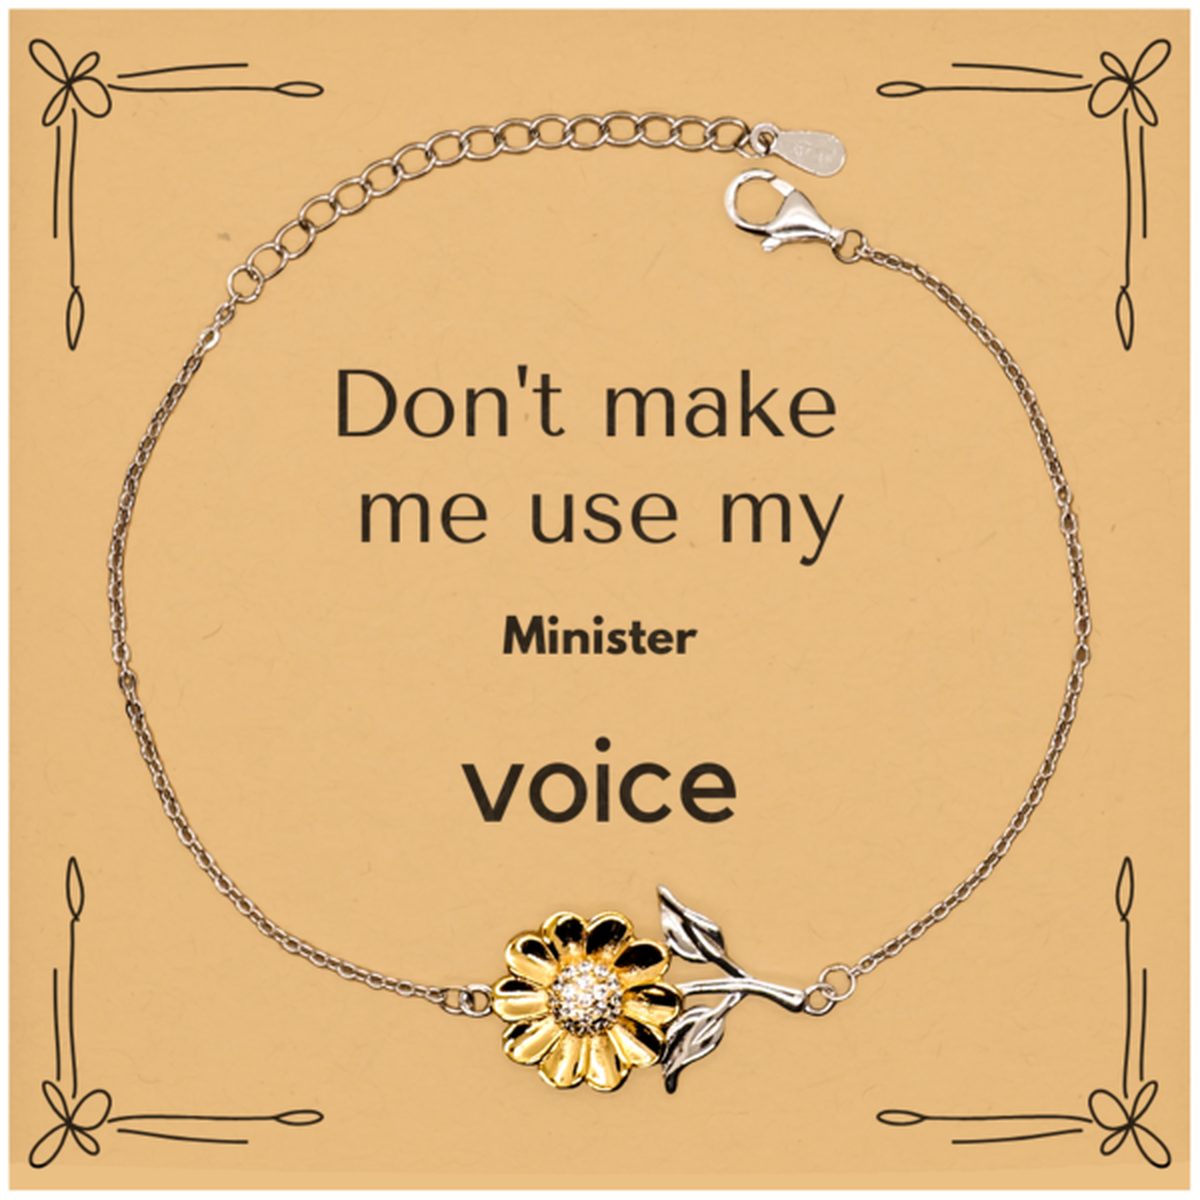 Don't make me use my Minister voice, Sarcasm Minister Card Gifts, Christmas Minister Sunflower Bracelet Birthday Unique Gifts For Minister Coworkers, Men, Women, Colleague, Friends